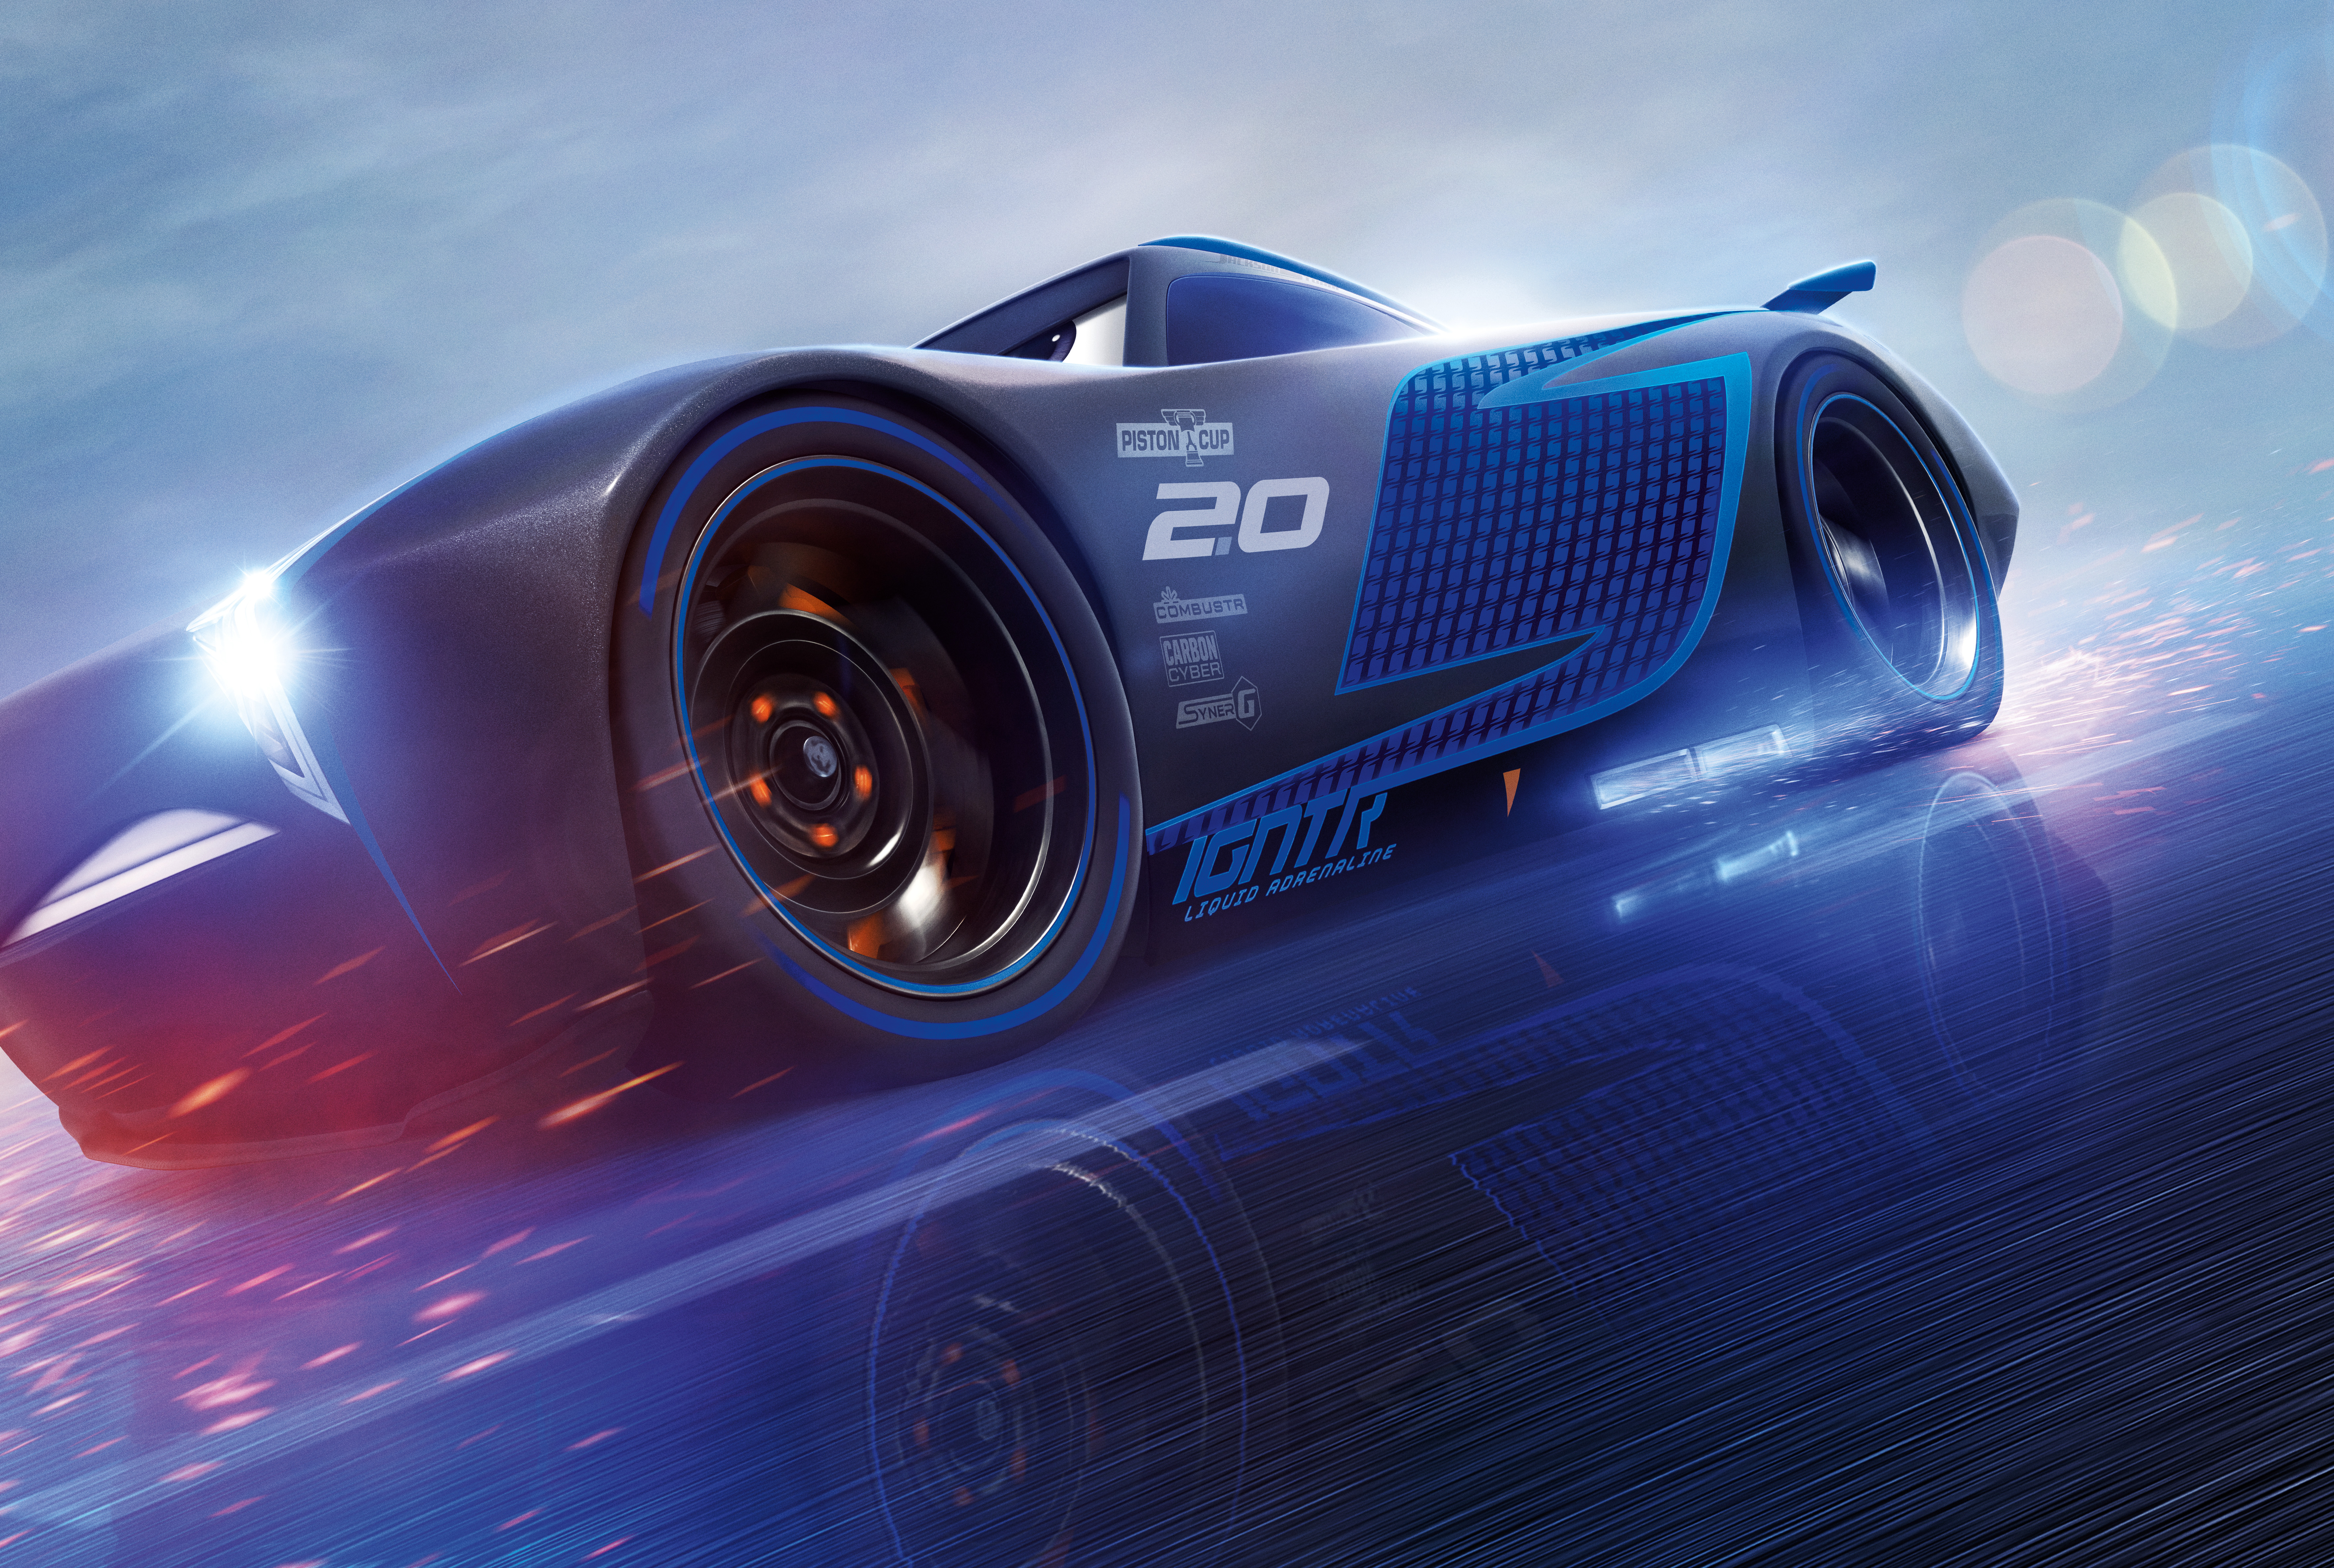 cars 3, jackson storm, movie for android